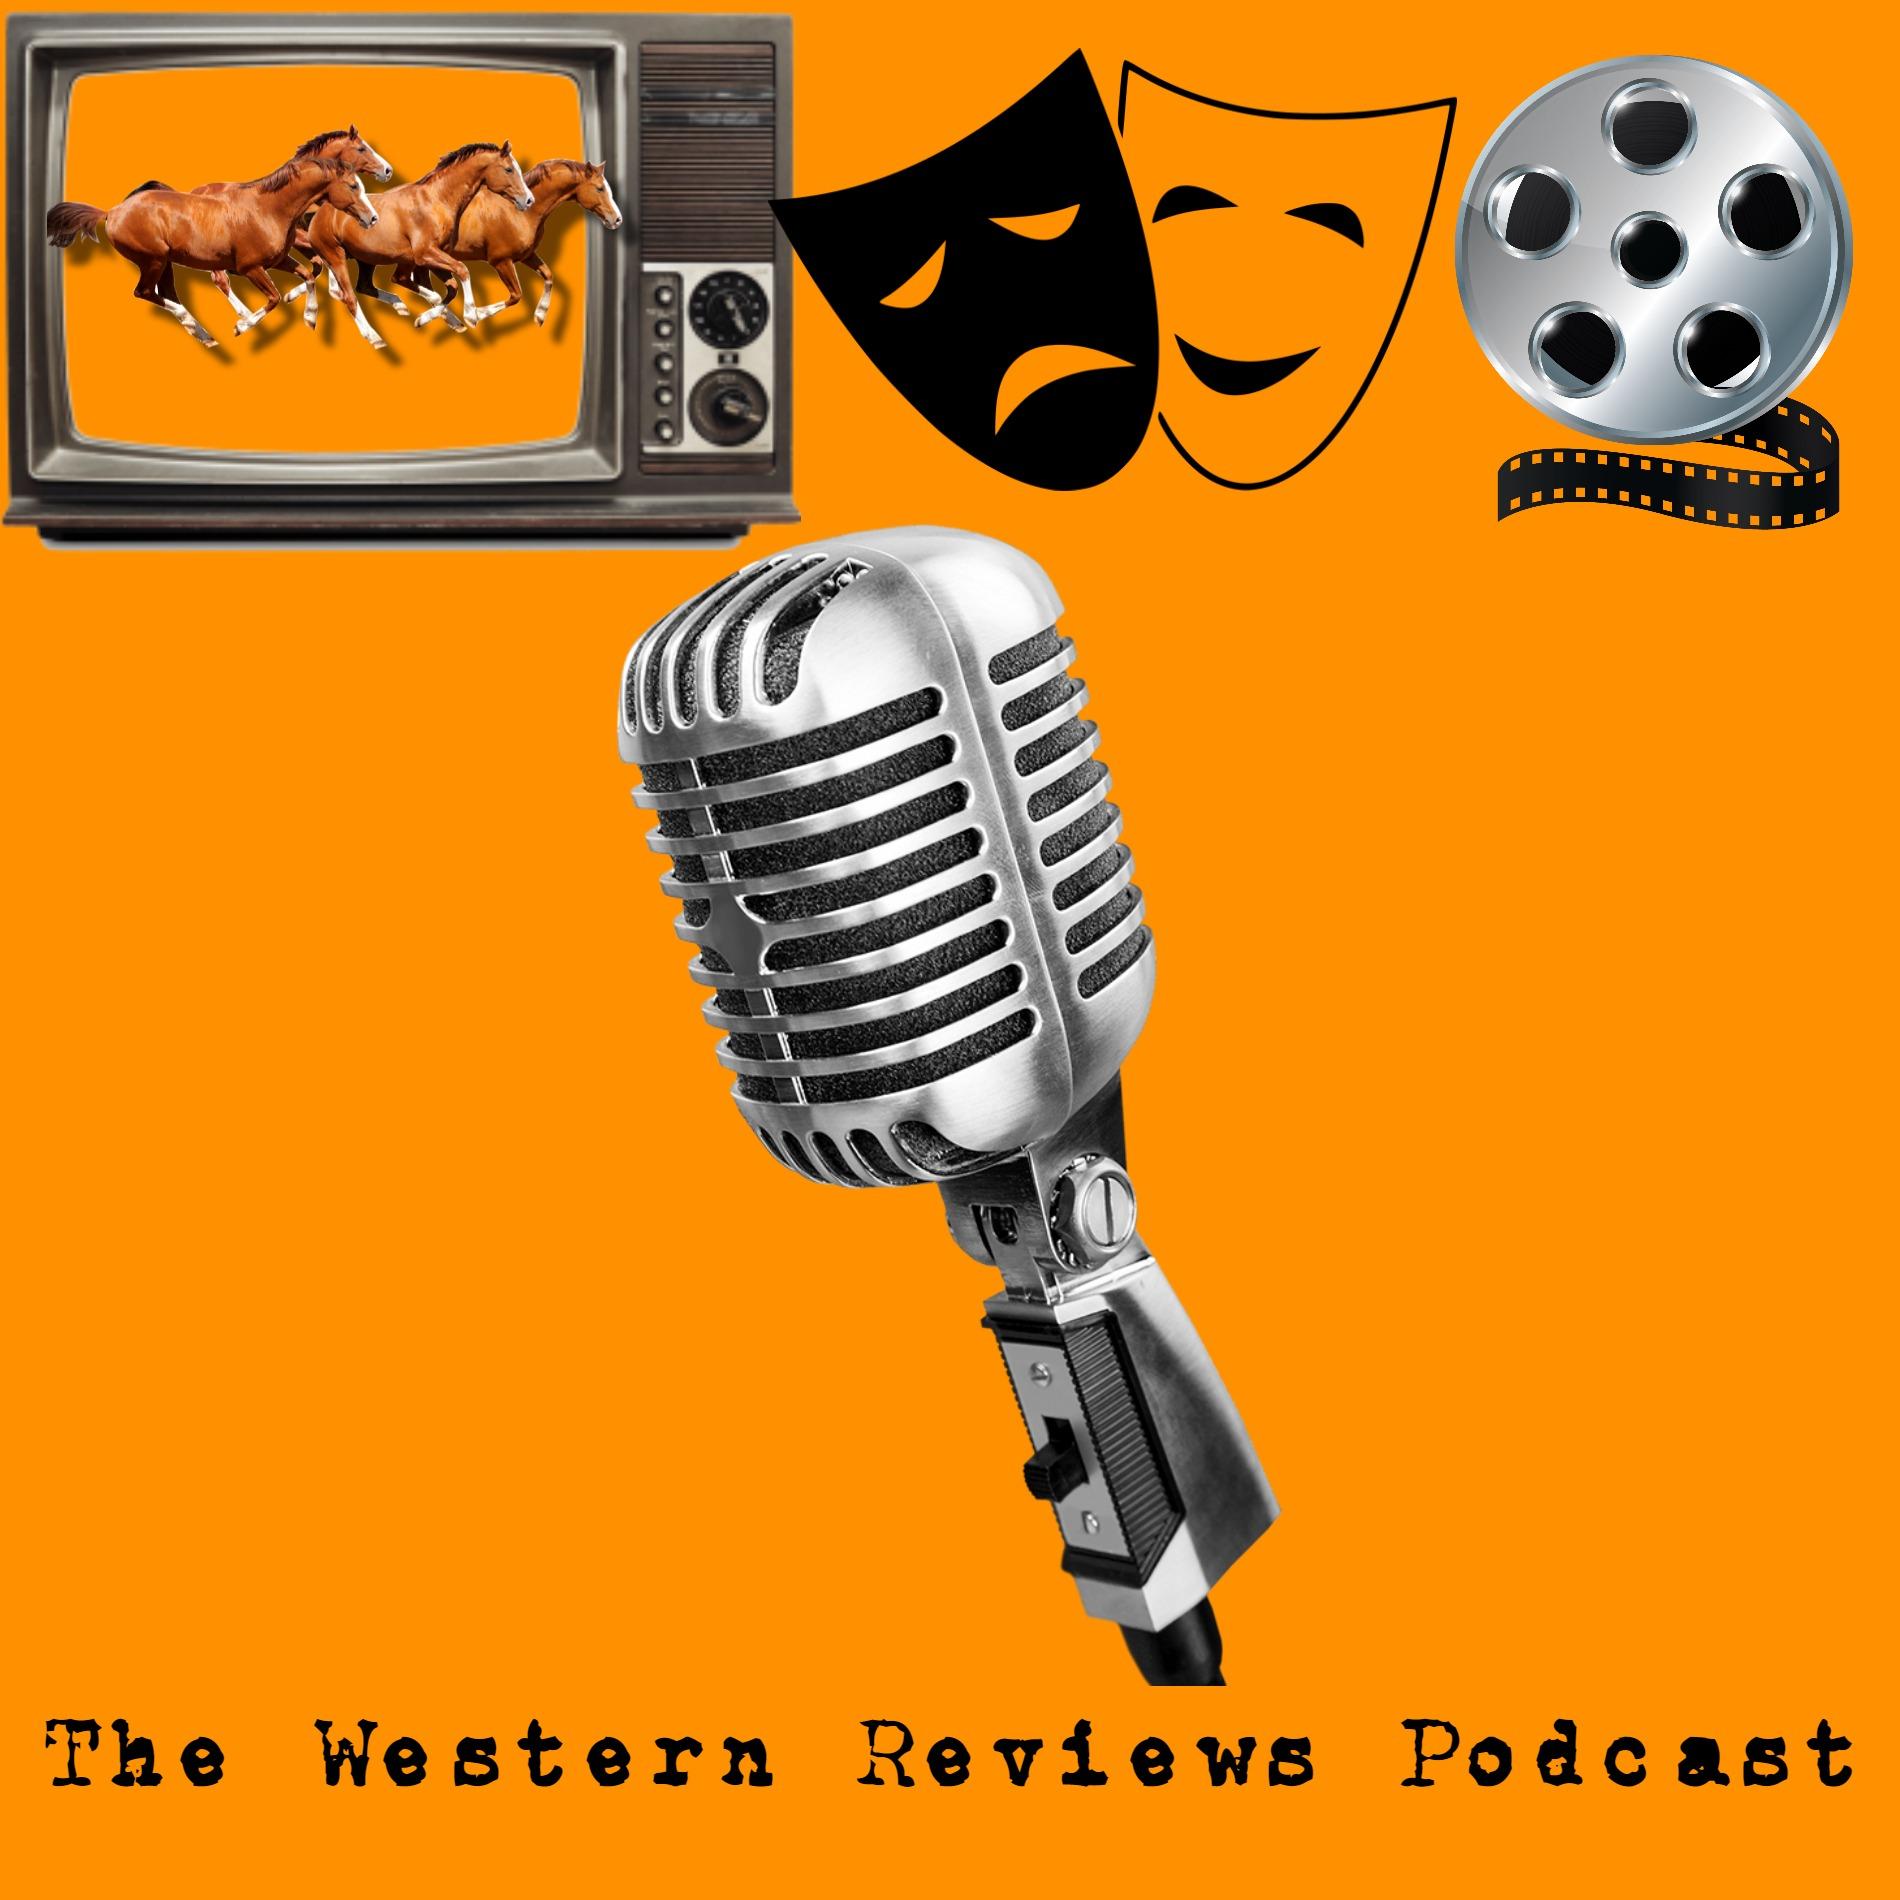 The Western Reviews Podcast